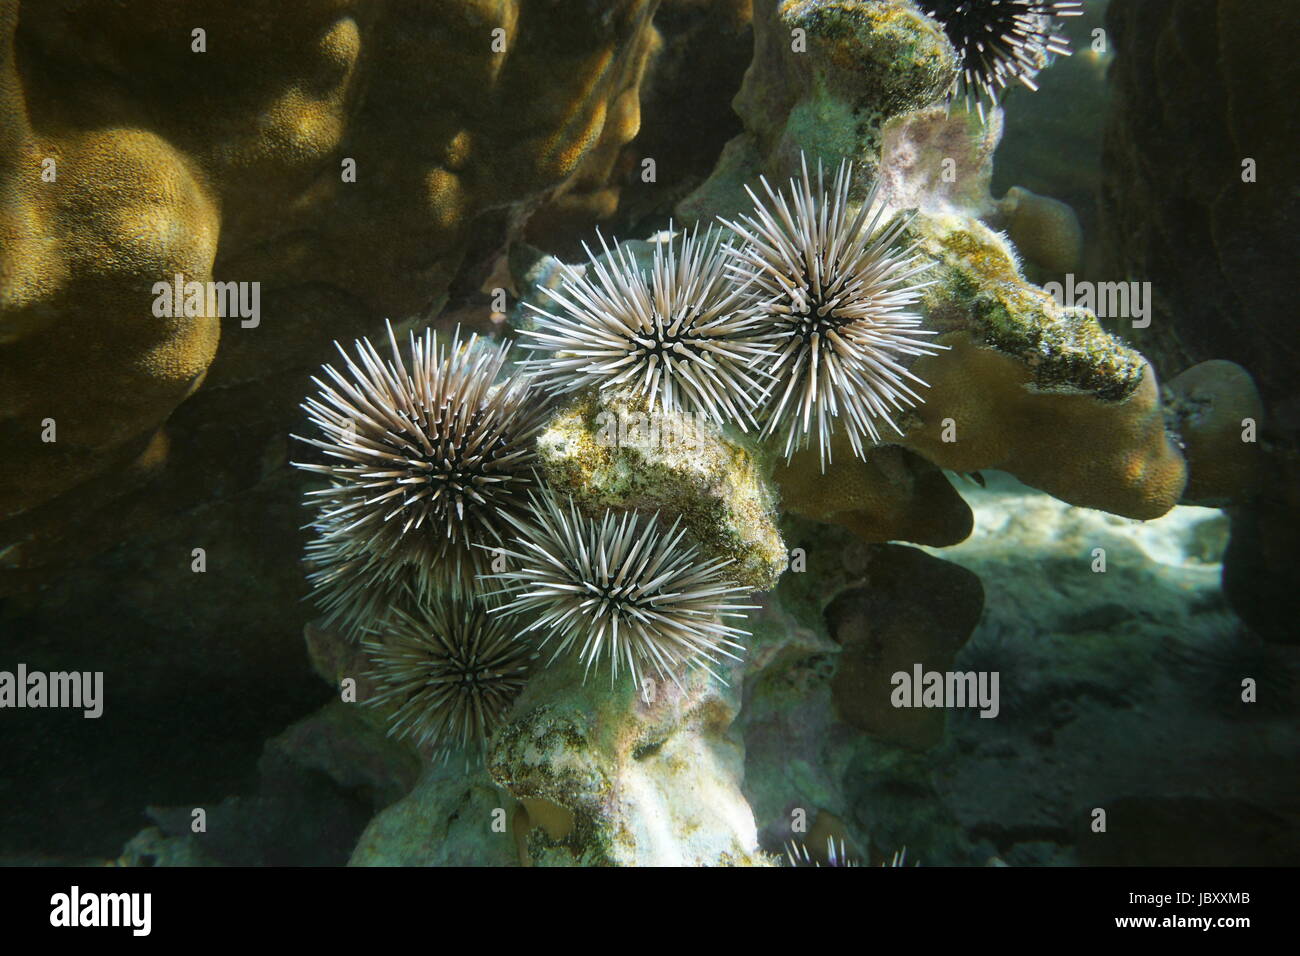 Sea urchins Echinometra mathaei, commonly called burrowing urchin, underwater in the lagoon of Rurutu, Australes, Pacific ocean, French Polynesia Stock Photo